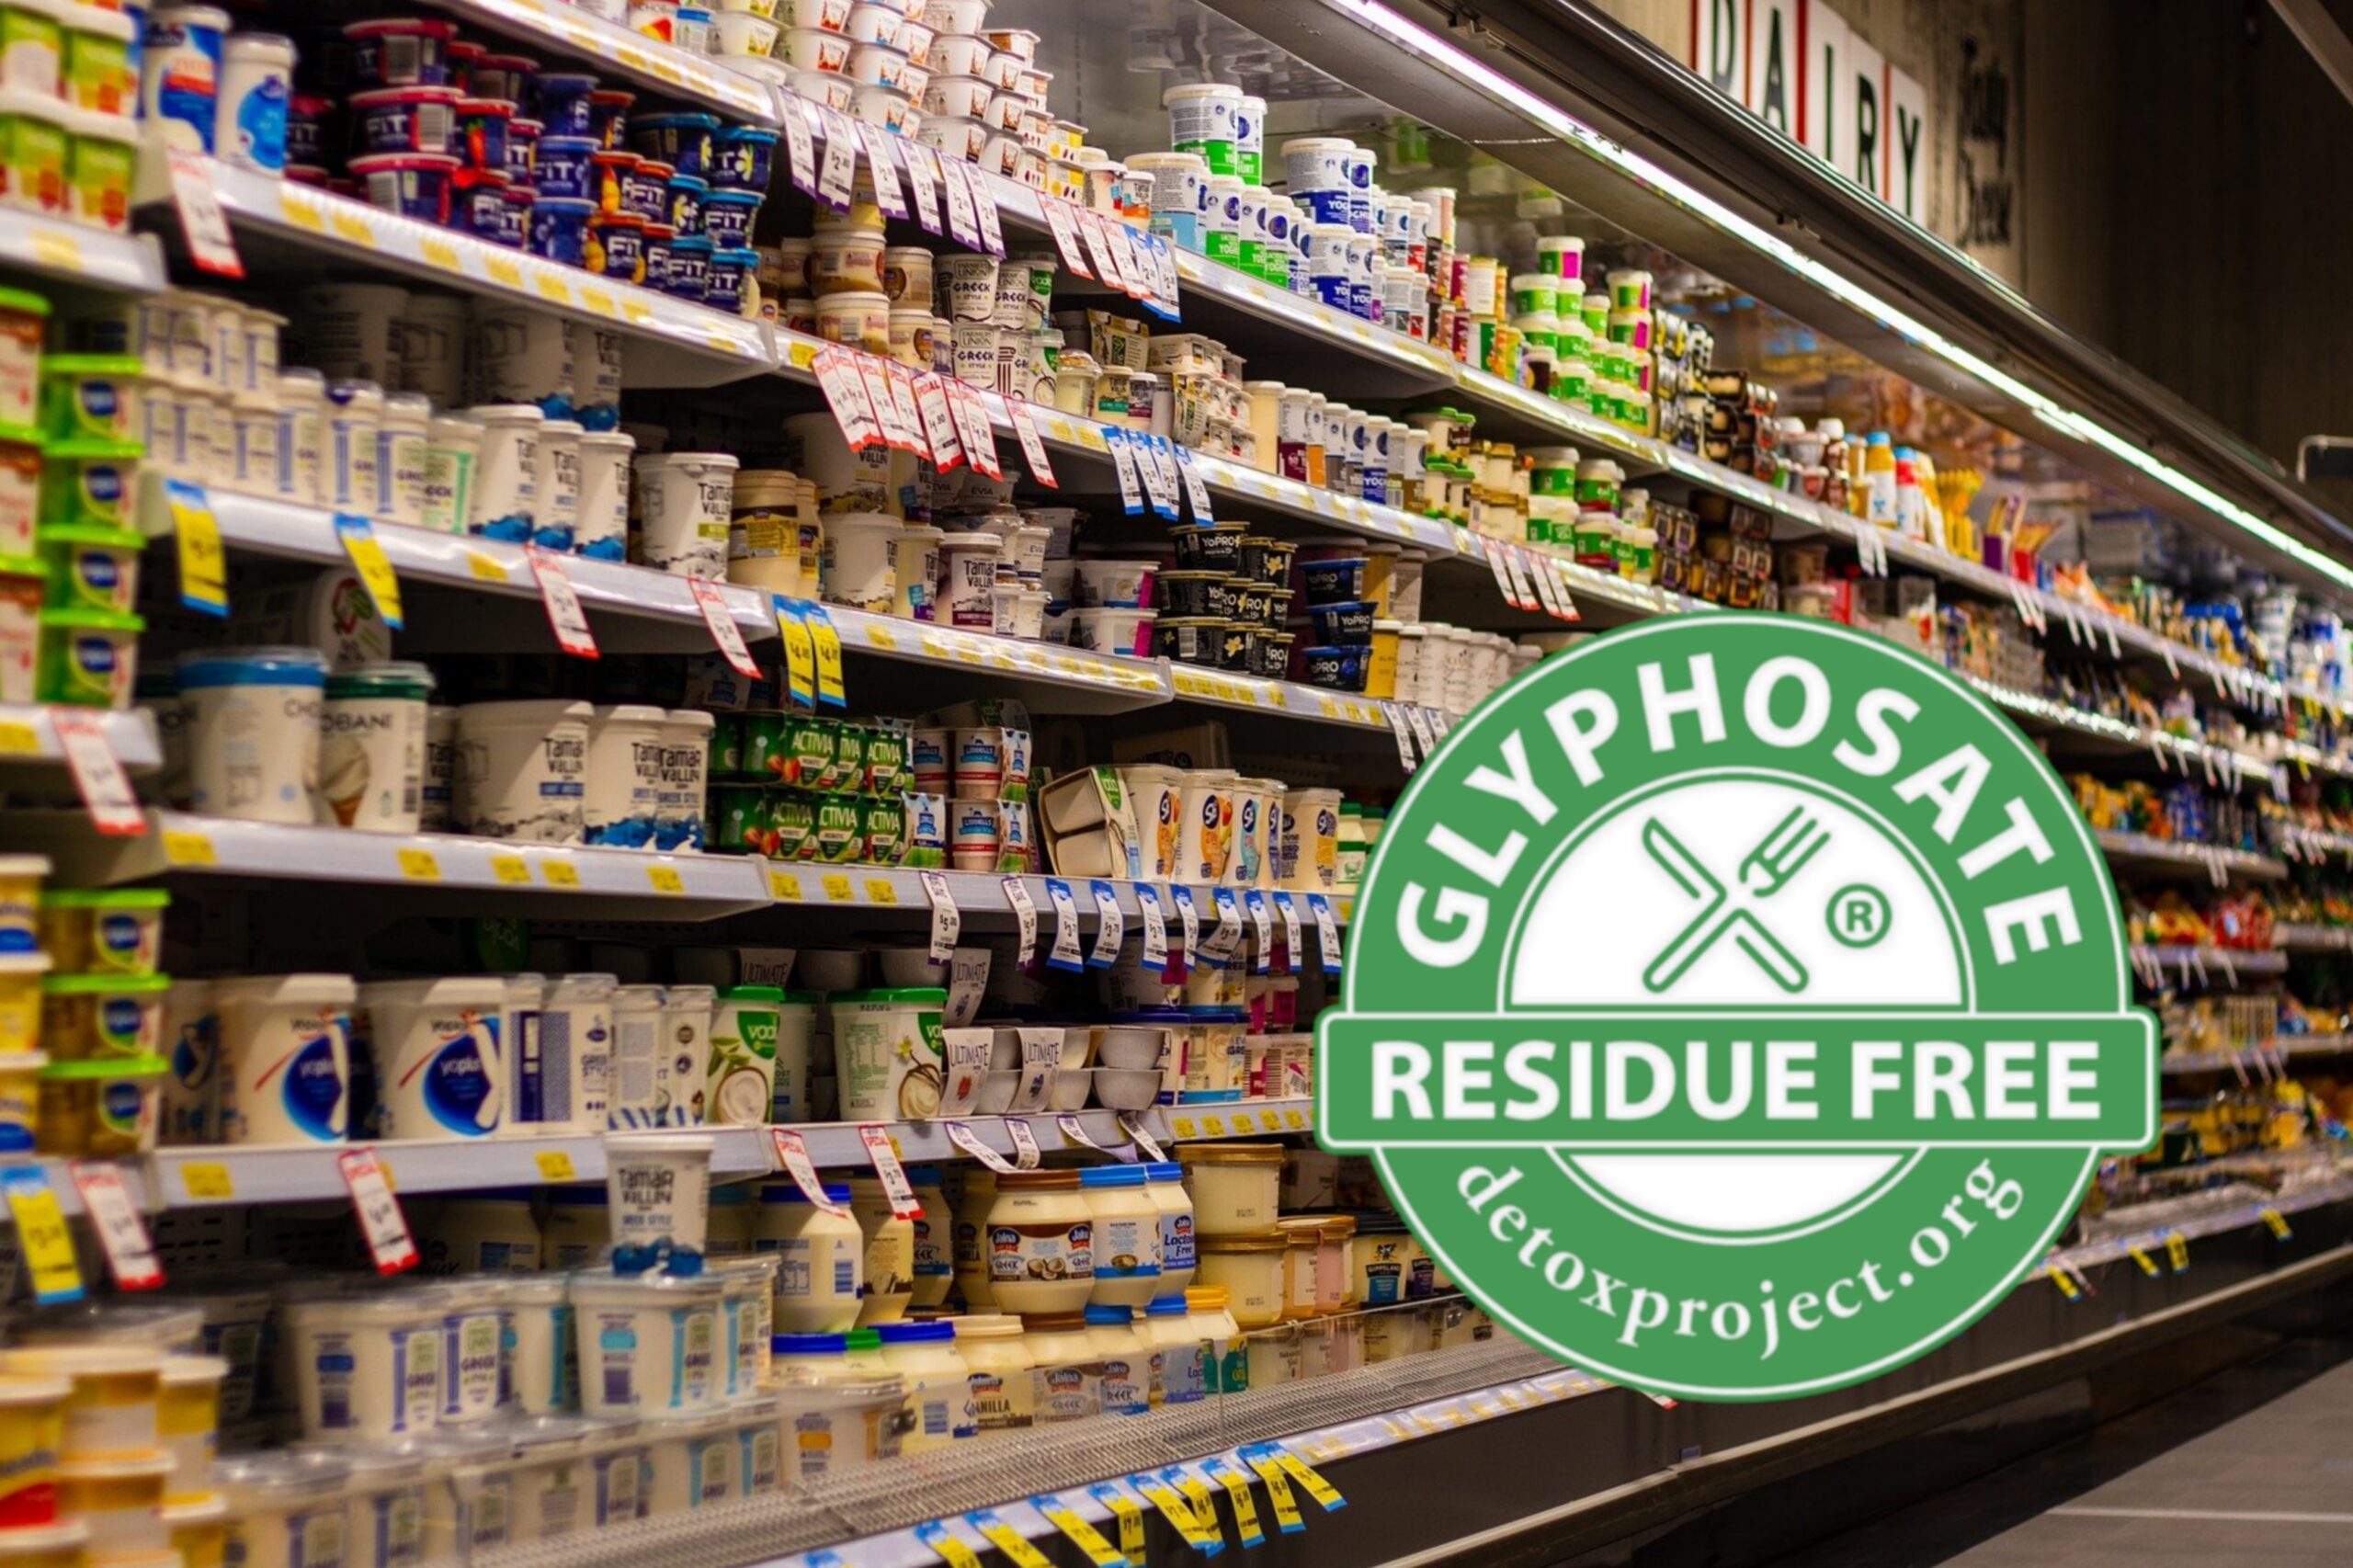 Glyphosate Residue Free Certification Sees Record Growth with $336